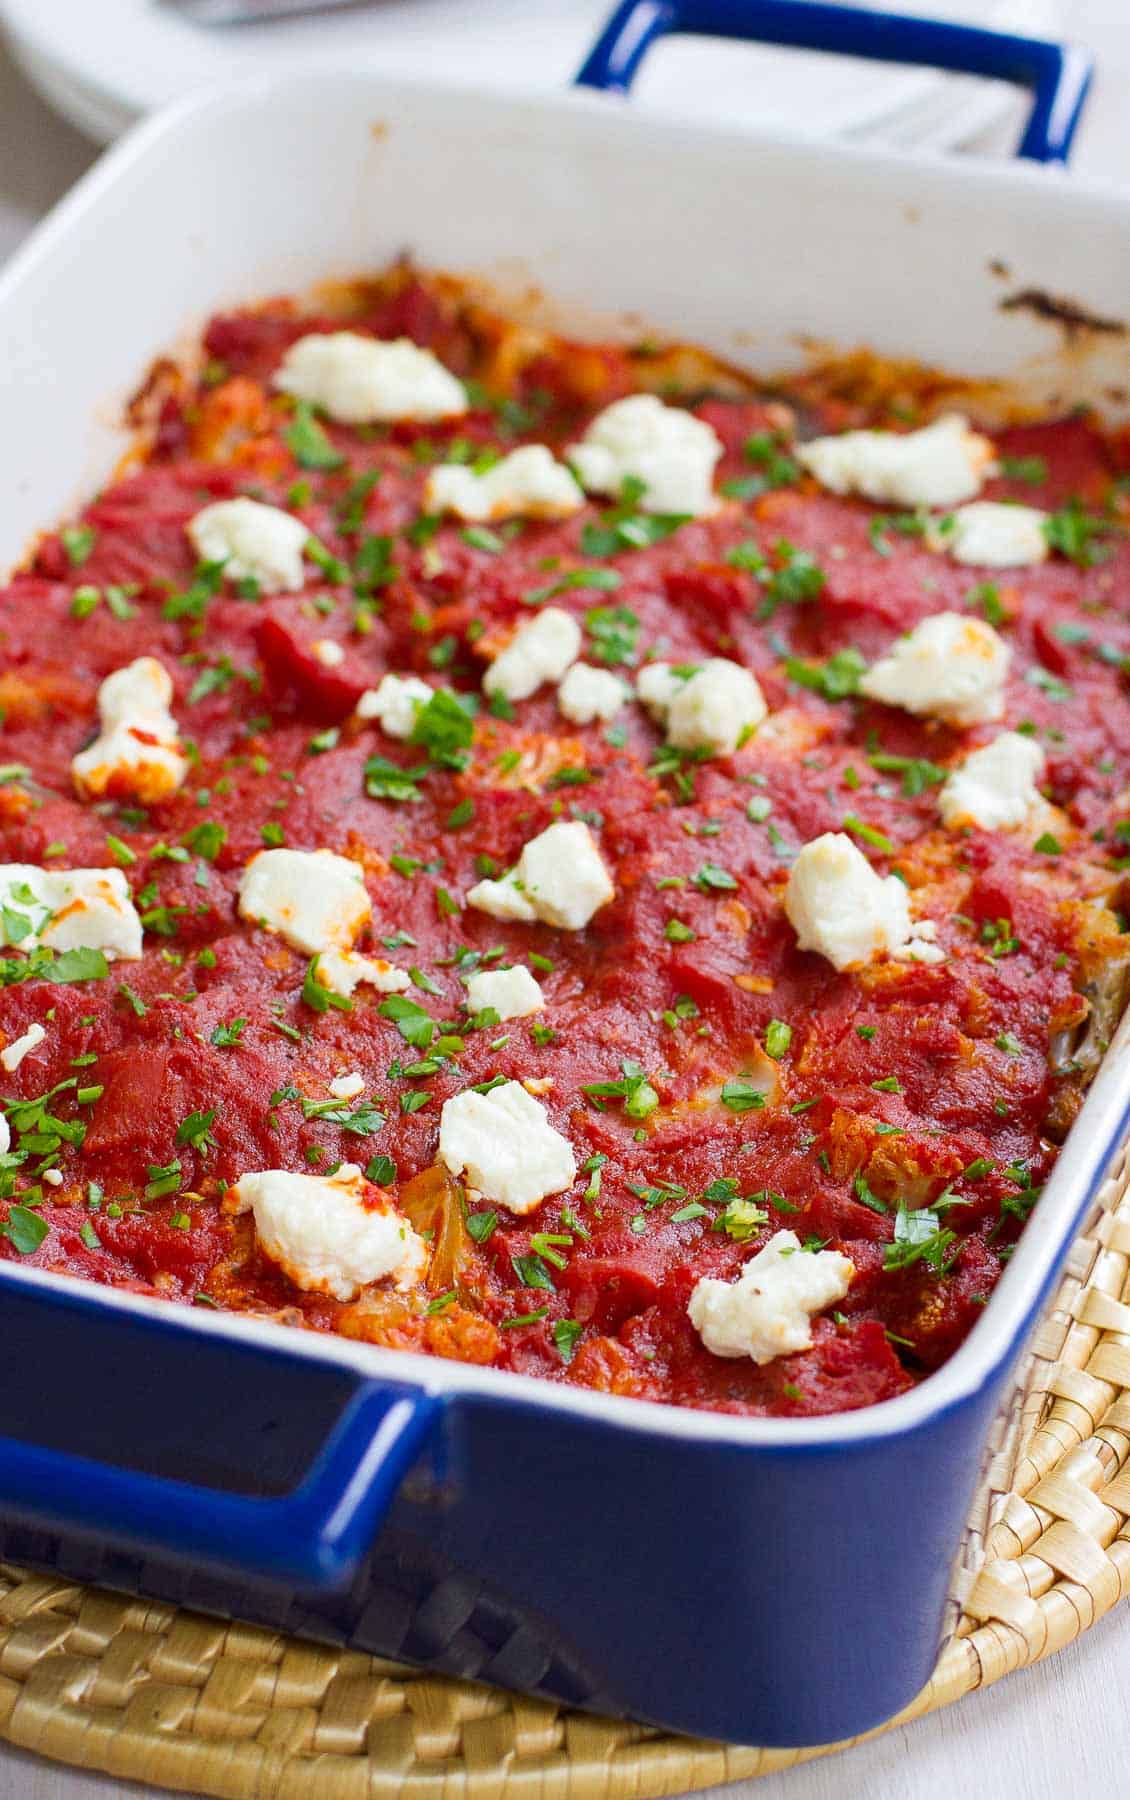 Blue casserole dish with cauliflower, tomato sauce and goat cheese.